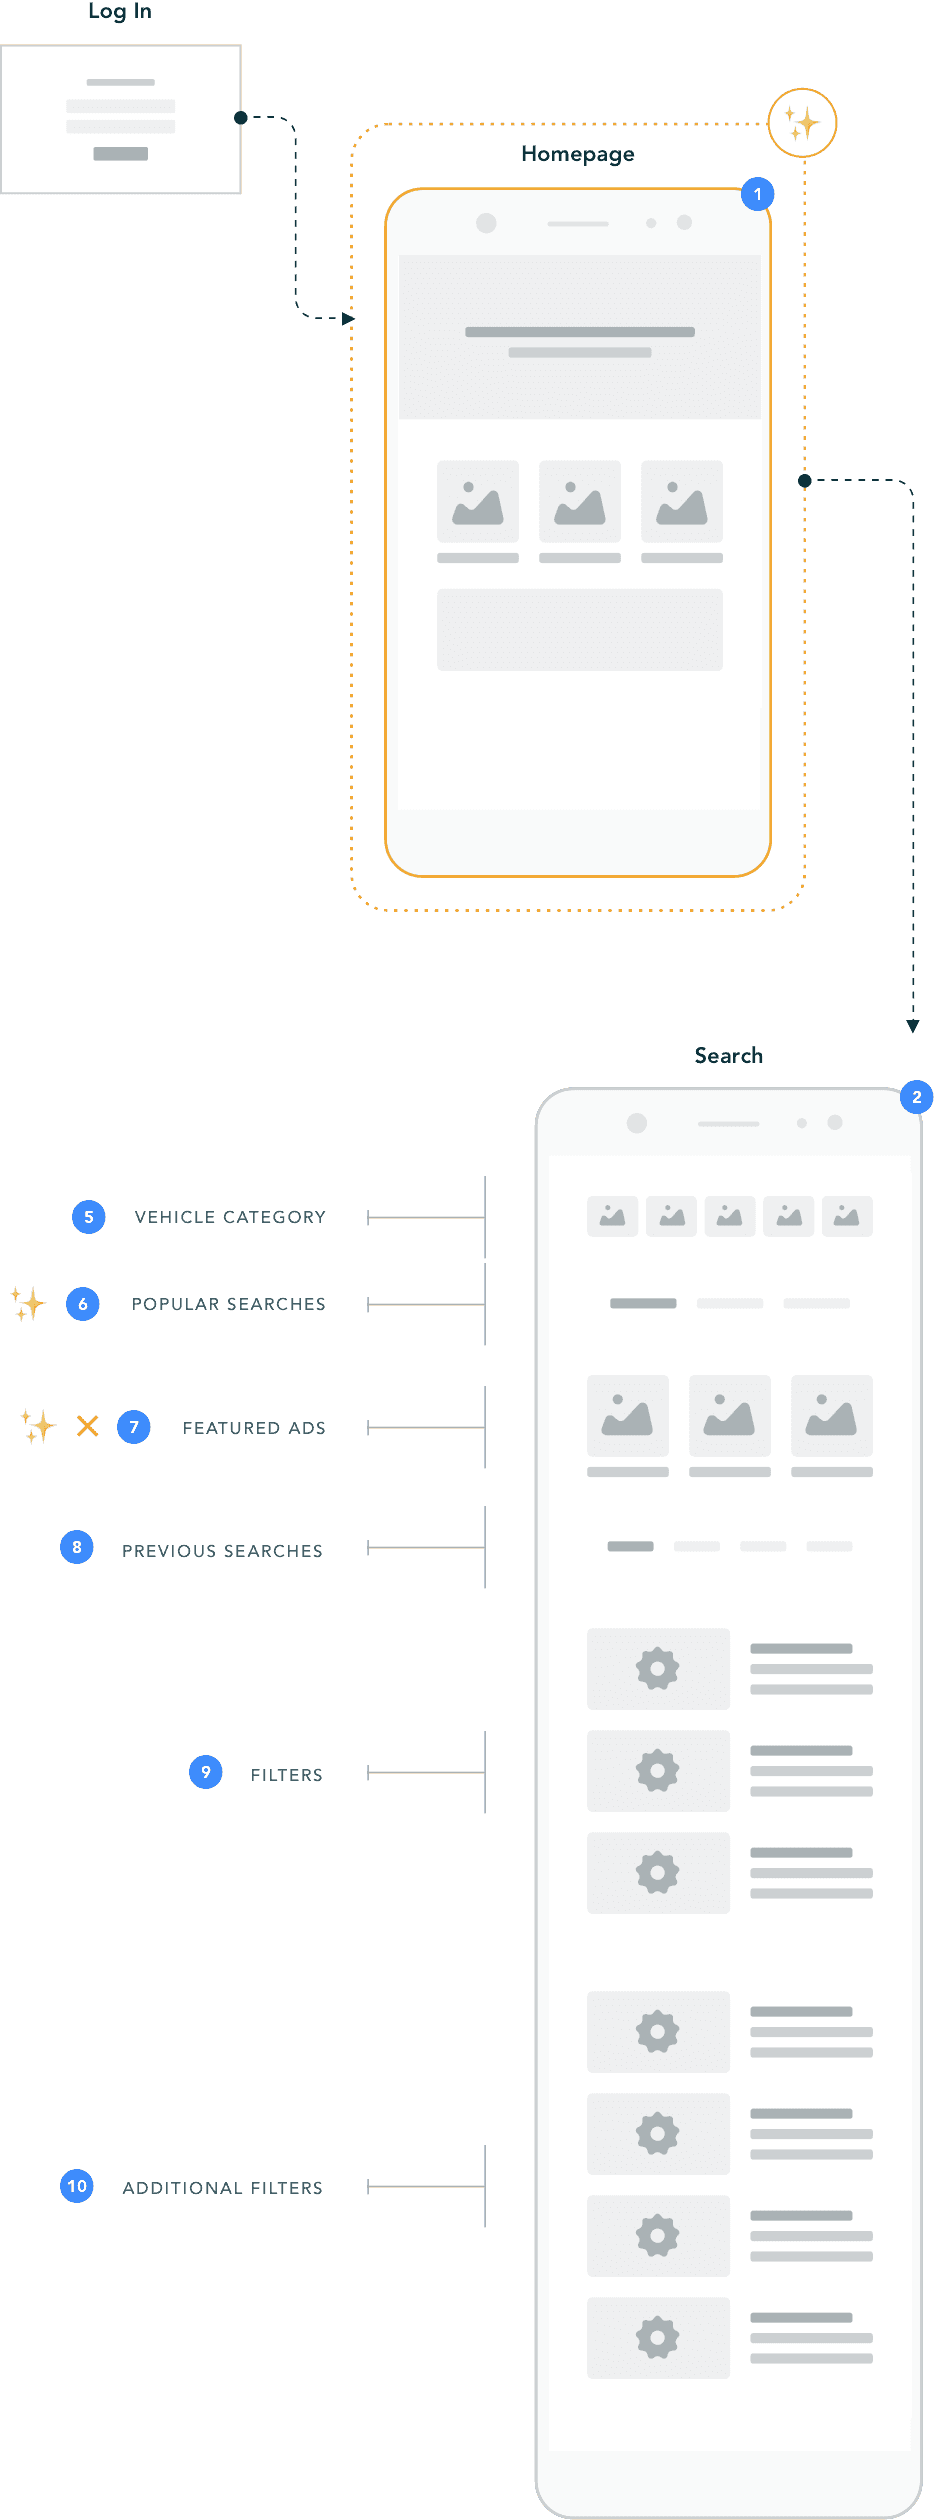 User experience flow diagram legend with icon types